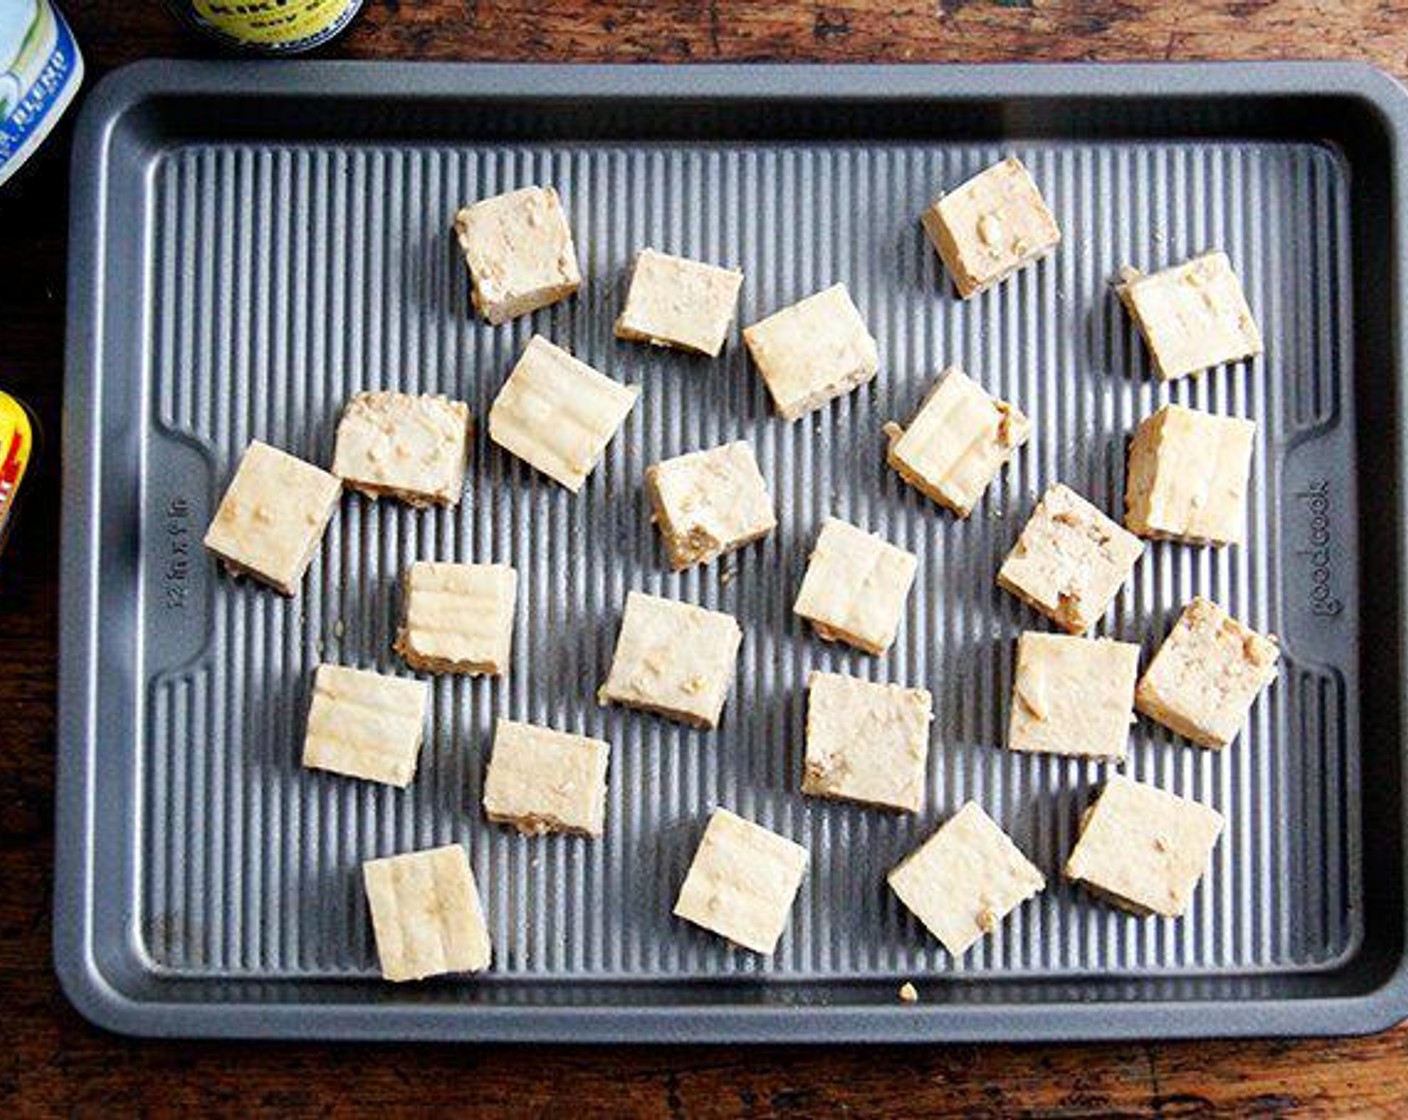 step 5 Remove the tofu from the towels, and cut into one-inch cubes. In a large bowl, gently toss the tofu with Olive Oil (1 Tbsp), the Soy Sauce (1 Tbsp) and the Corn Starch (1 Tbsp) until evenly coated. Spread out on the parchment-line sheet pan.